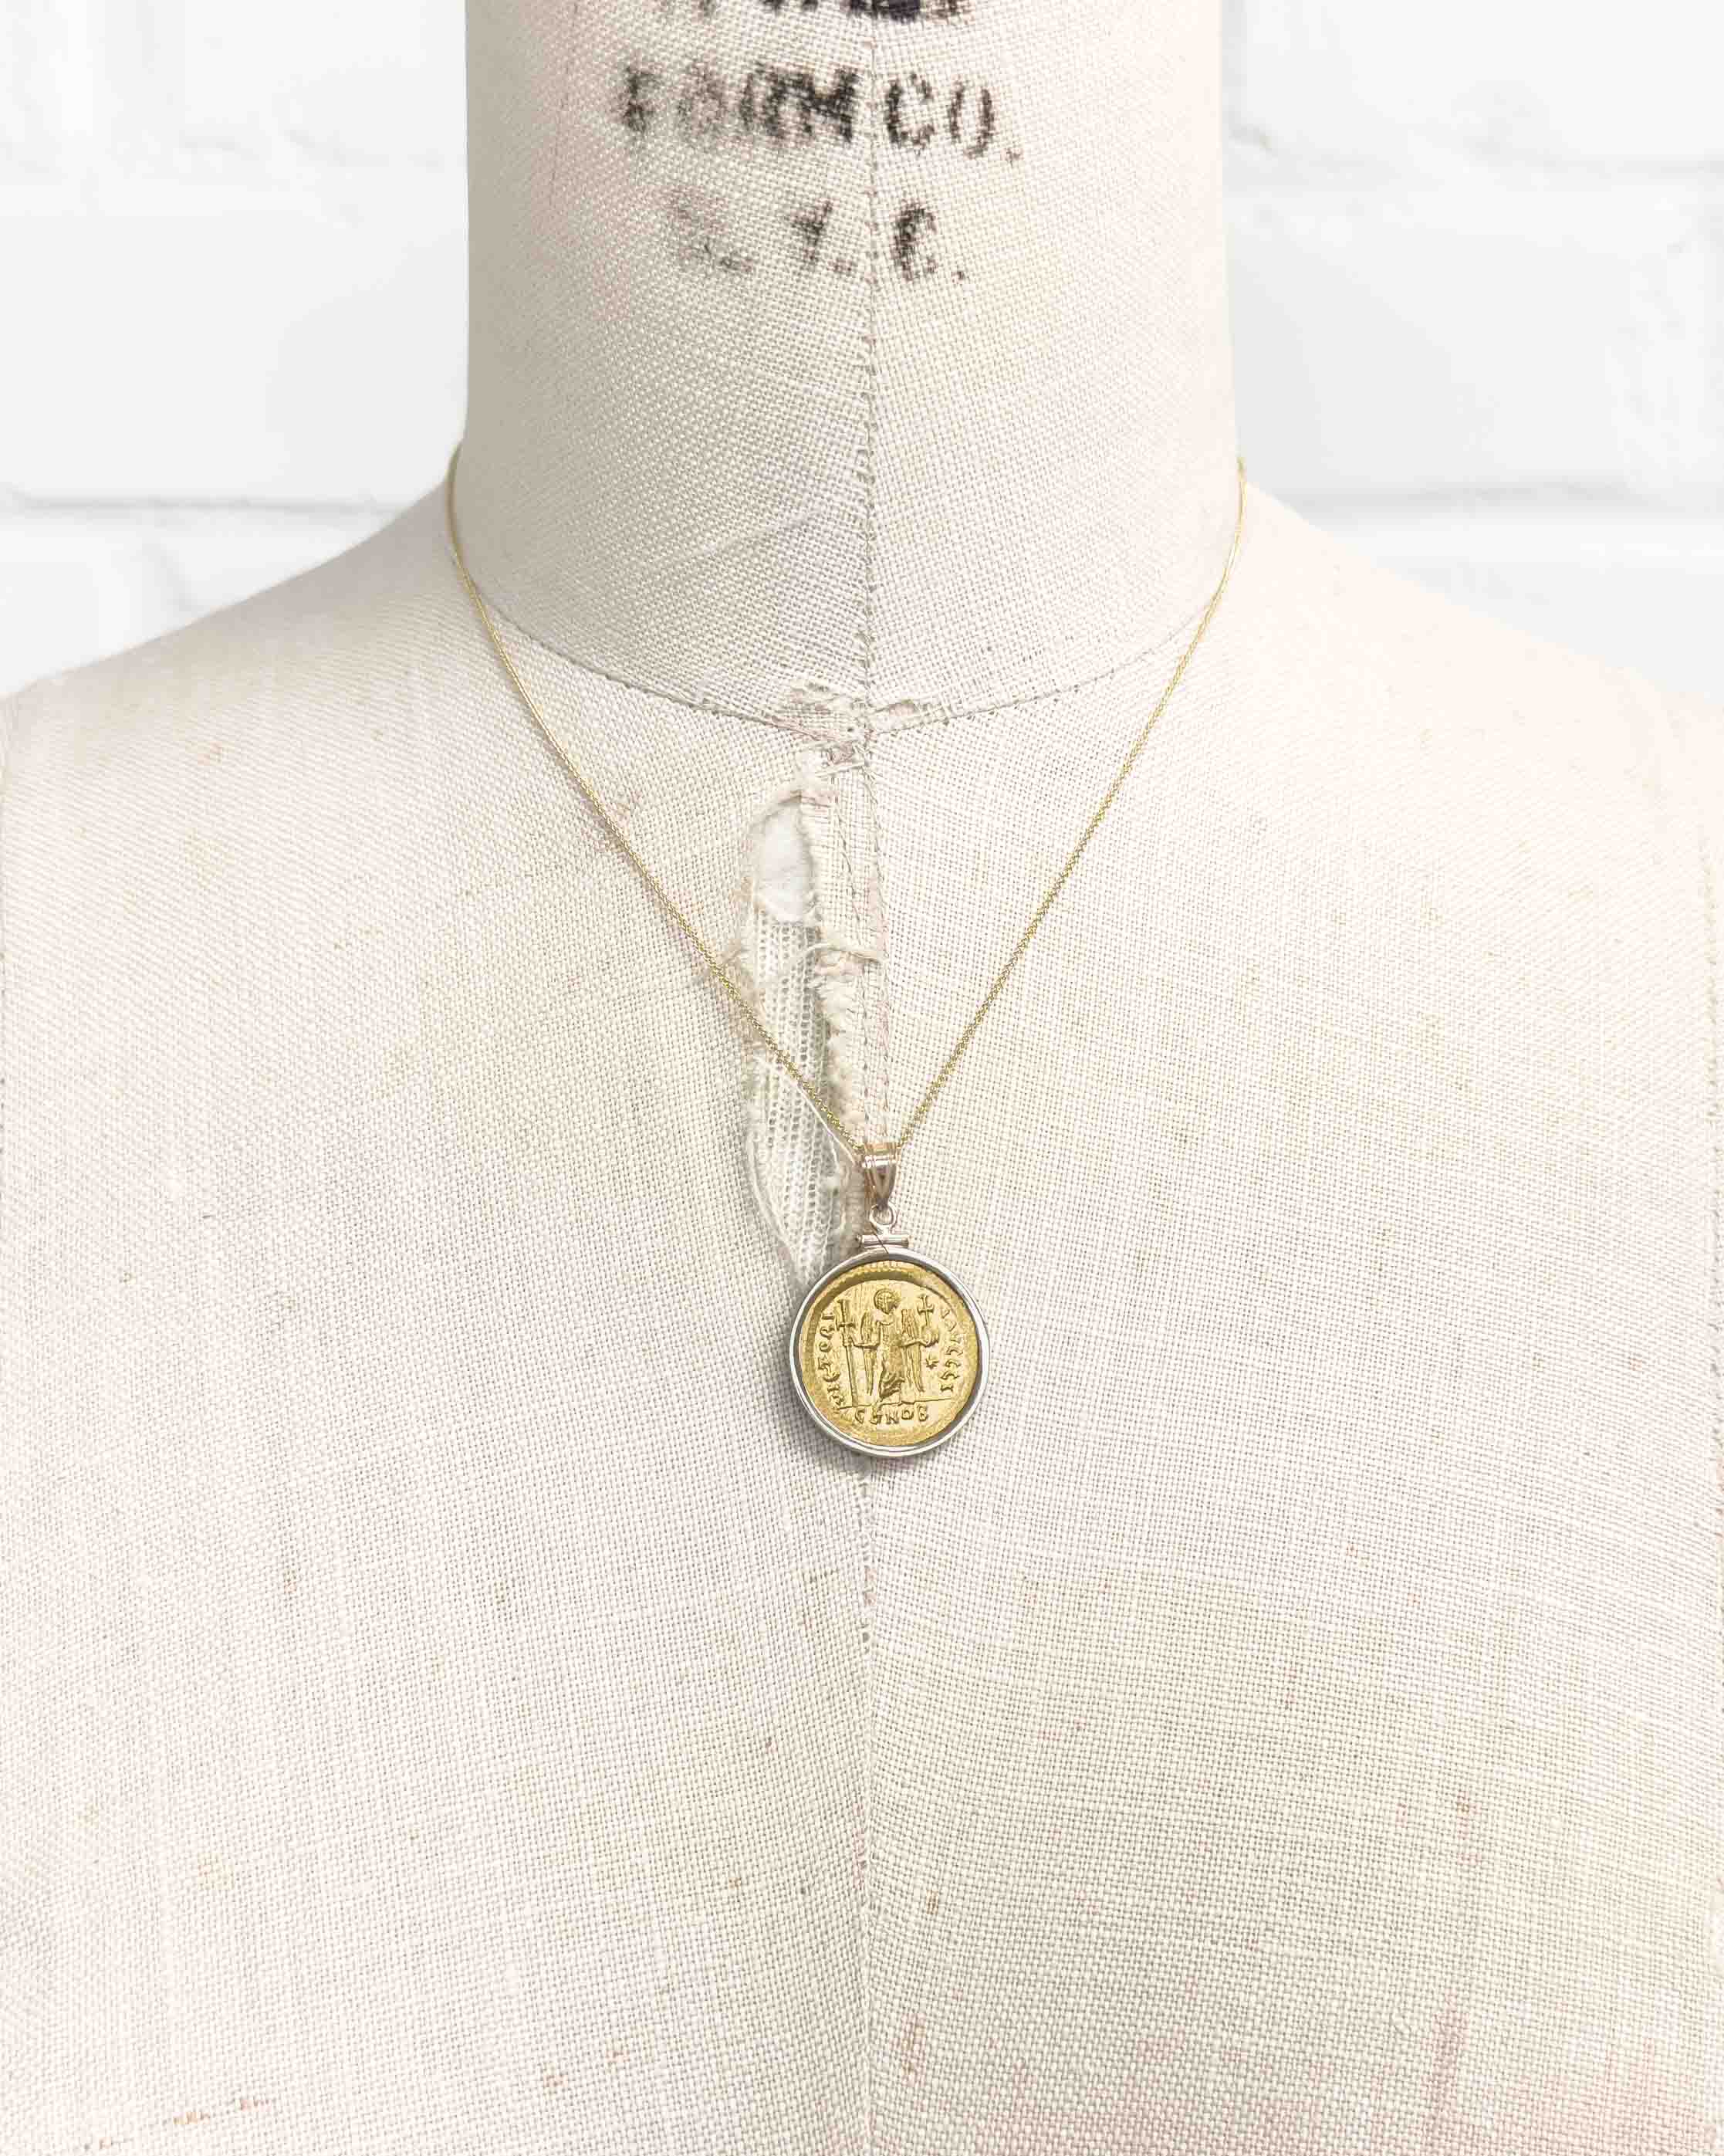 14k Genuine Ancient Byzantine Coin Necklace (Justinian I; 538-545 A.D.)